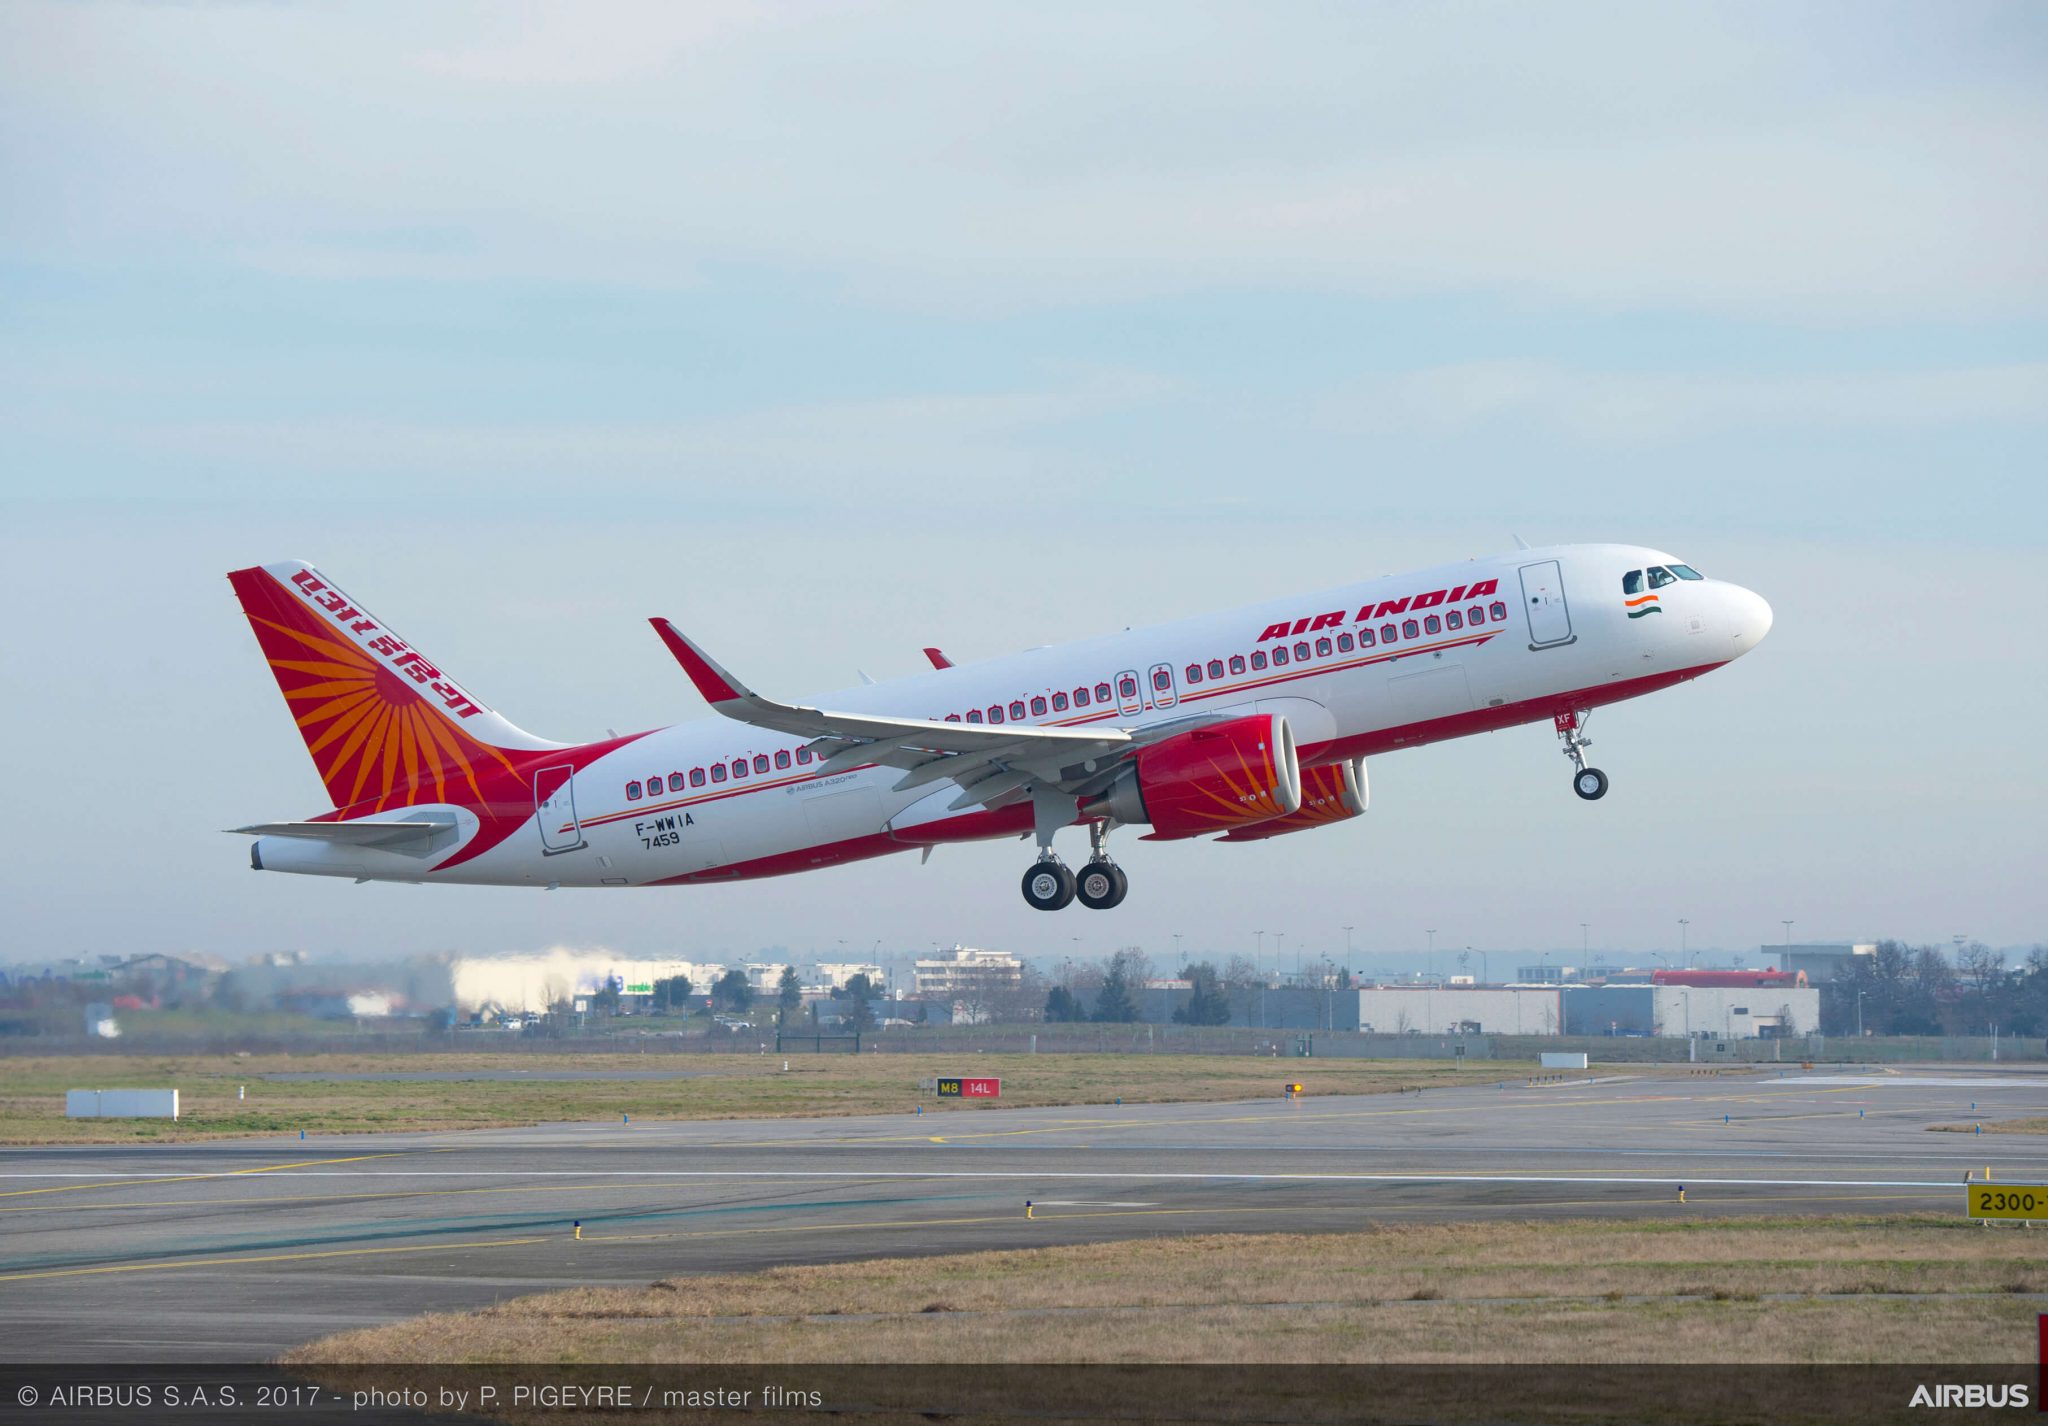 Air India to be split up before sale